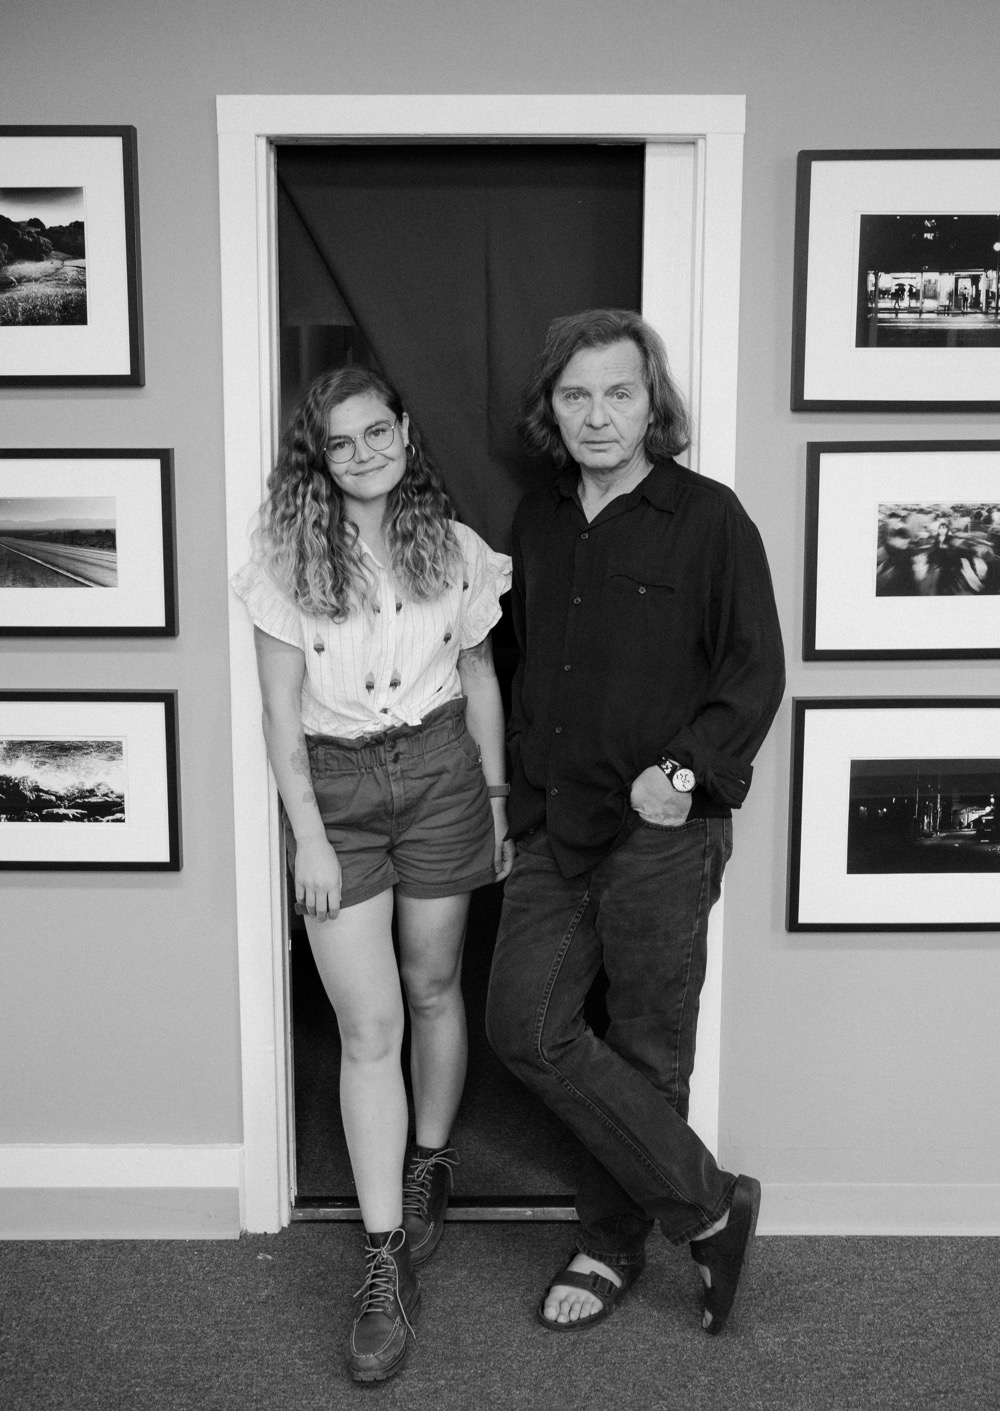 A black and white photo of Anna Longworth (left) and Lyosha Svinarski (right) standing looking at the camera in a door way